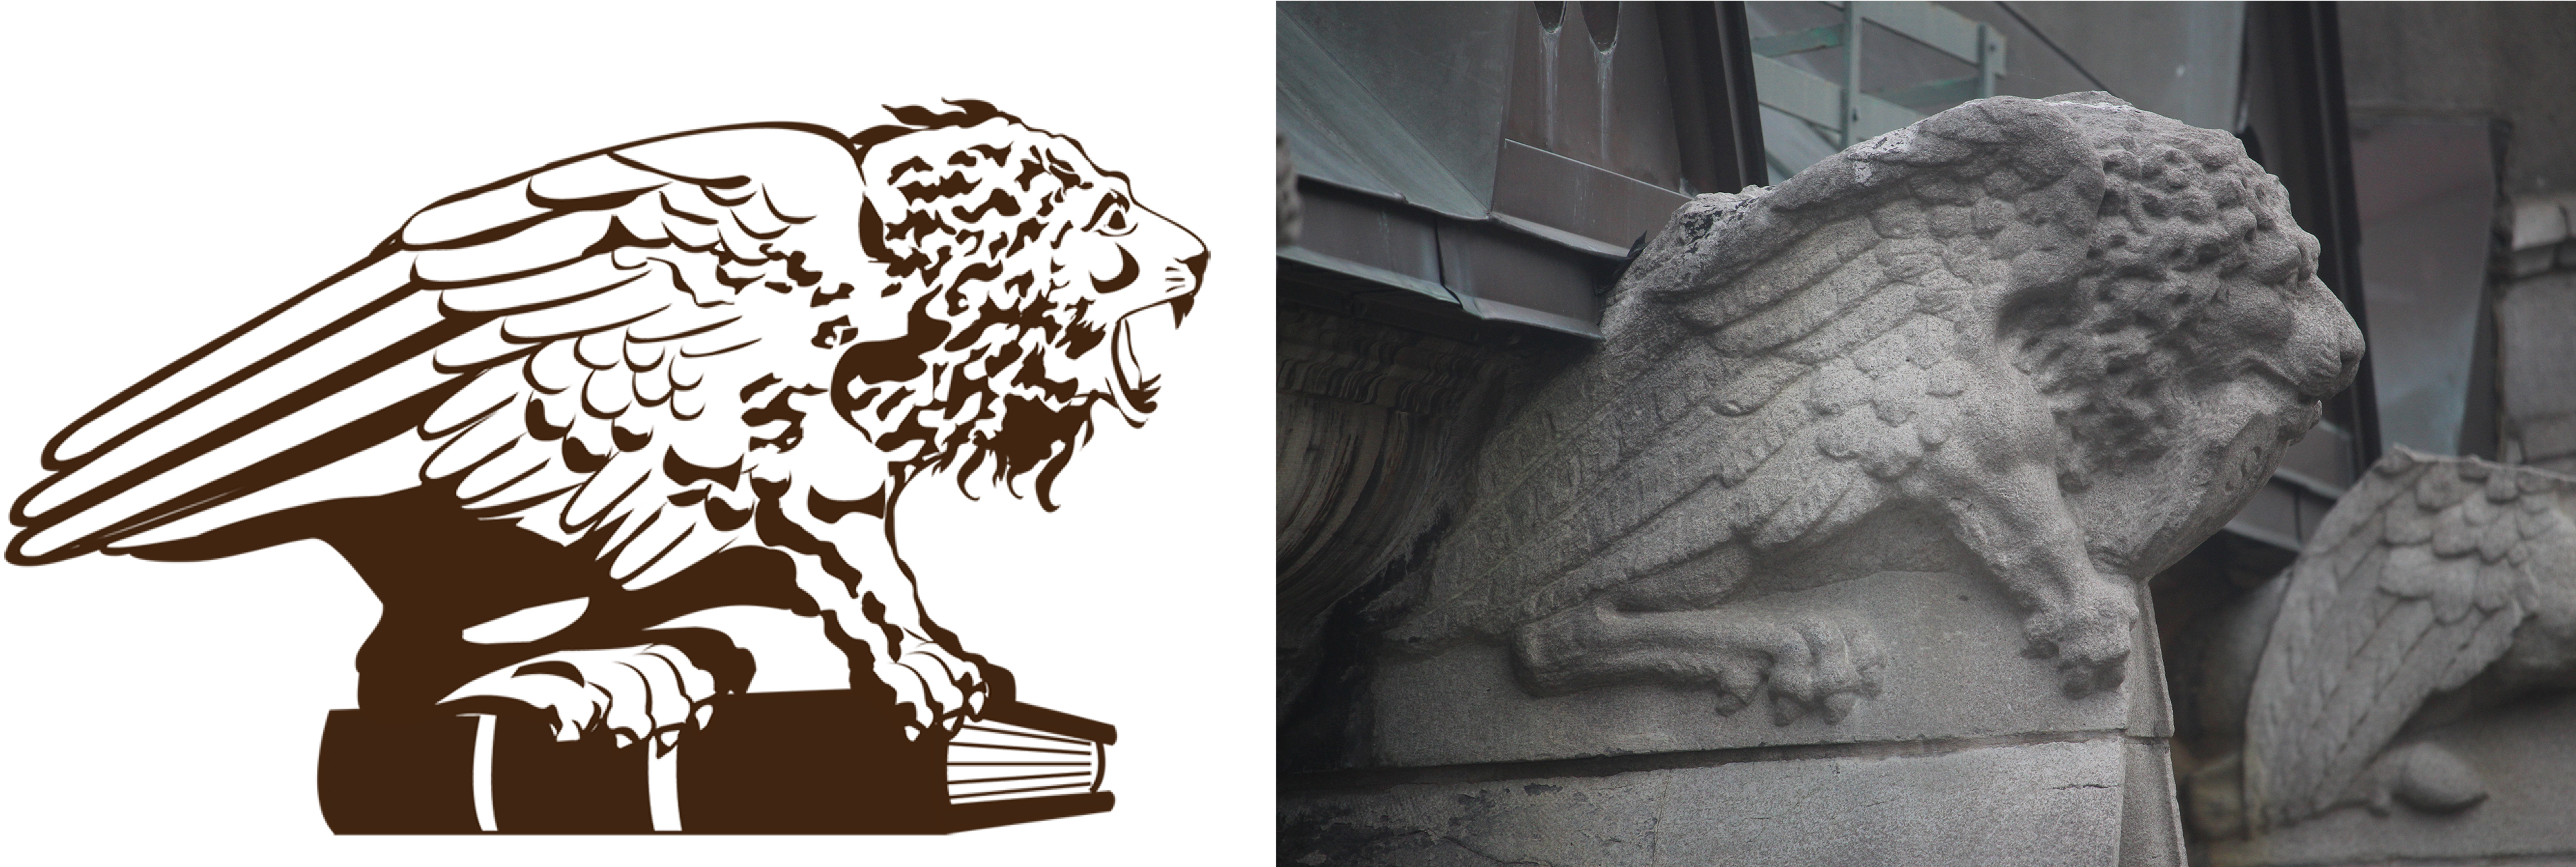 a roaring venetian lion, crouching on a book next to a photo of a venetian lion gargoyle that is holding a book in its mouth